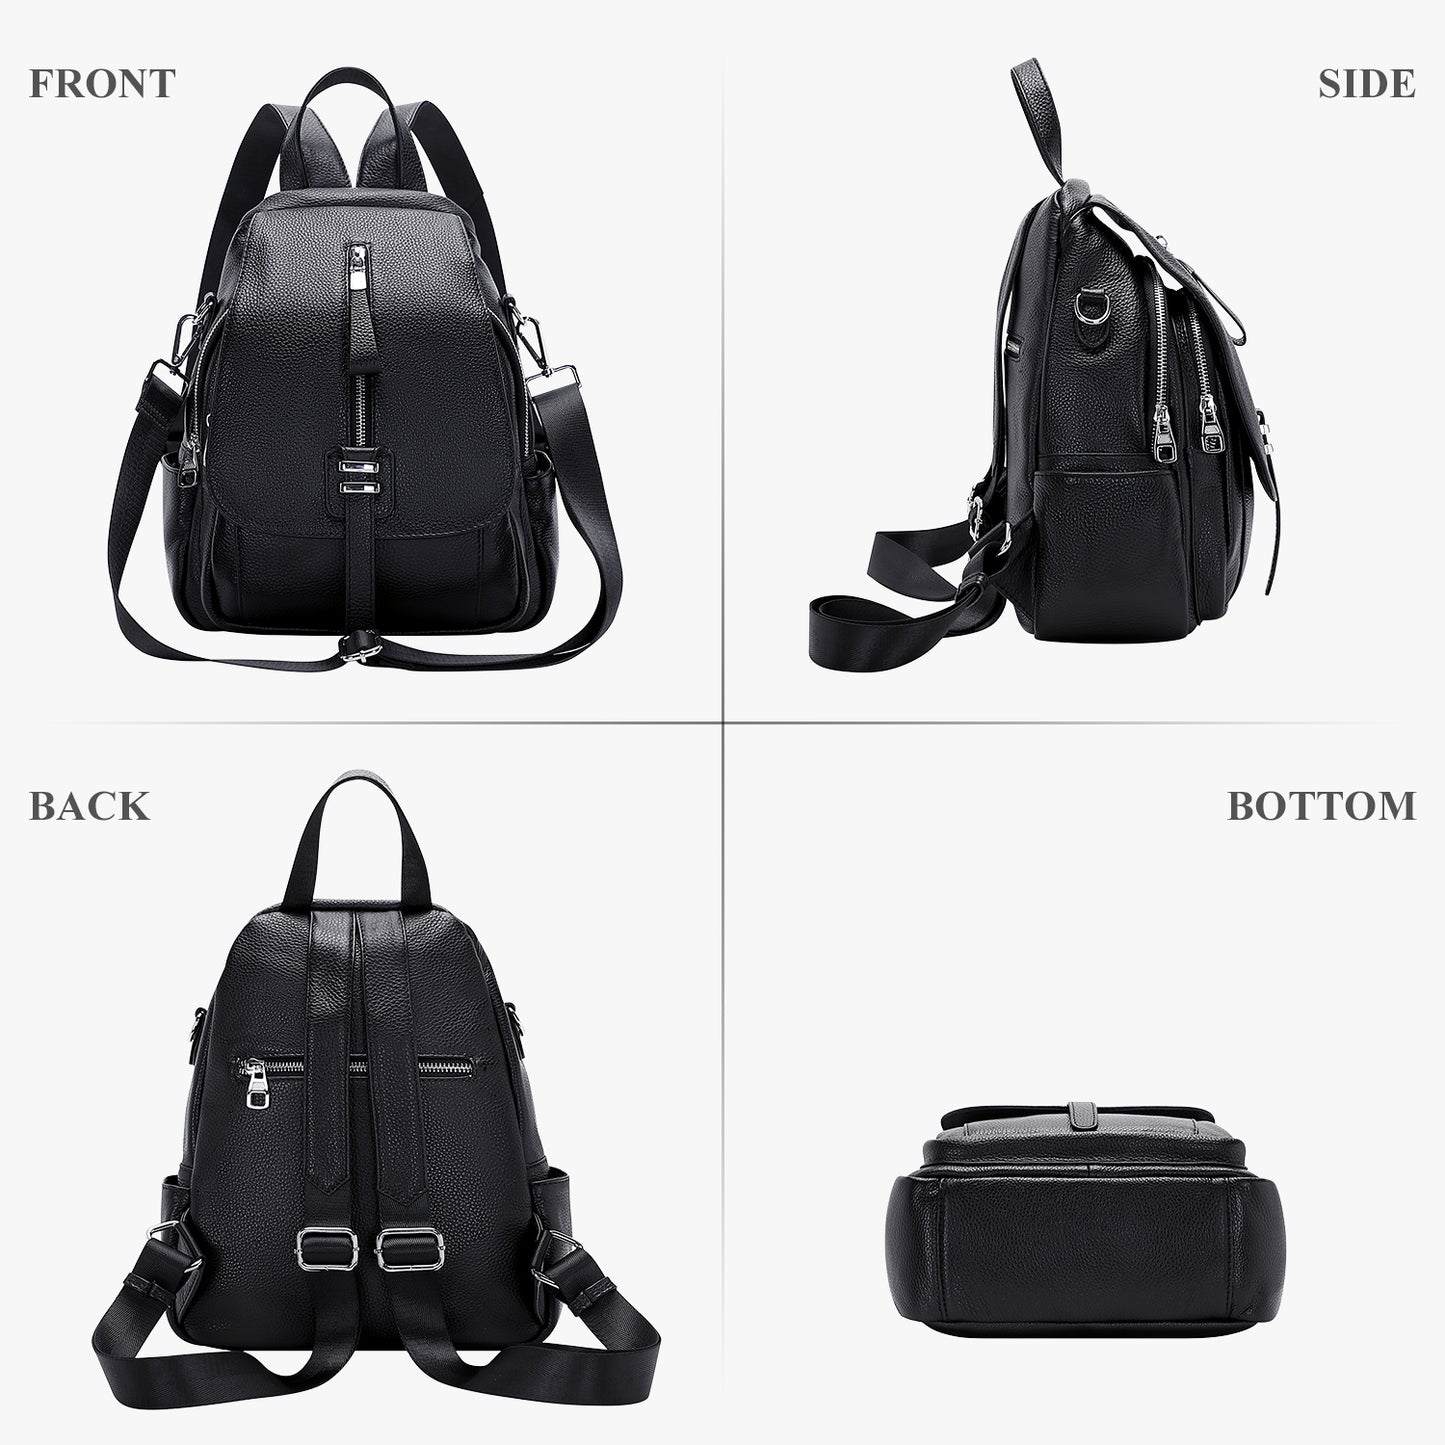 ALTOSY Backpack Purse with Flap